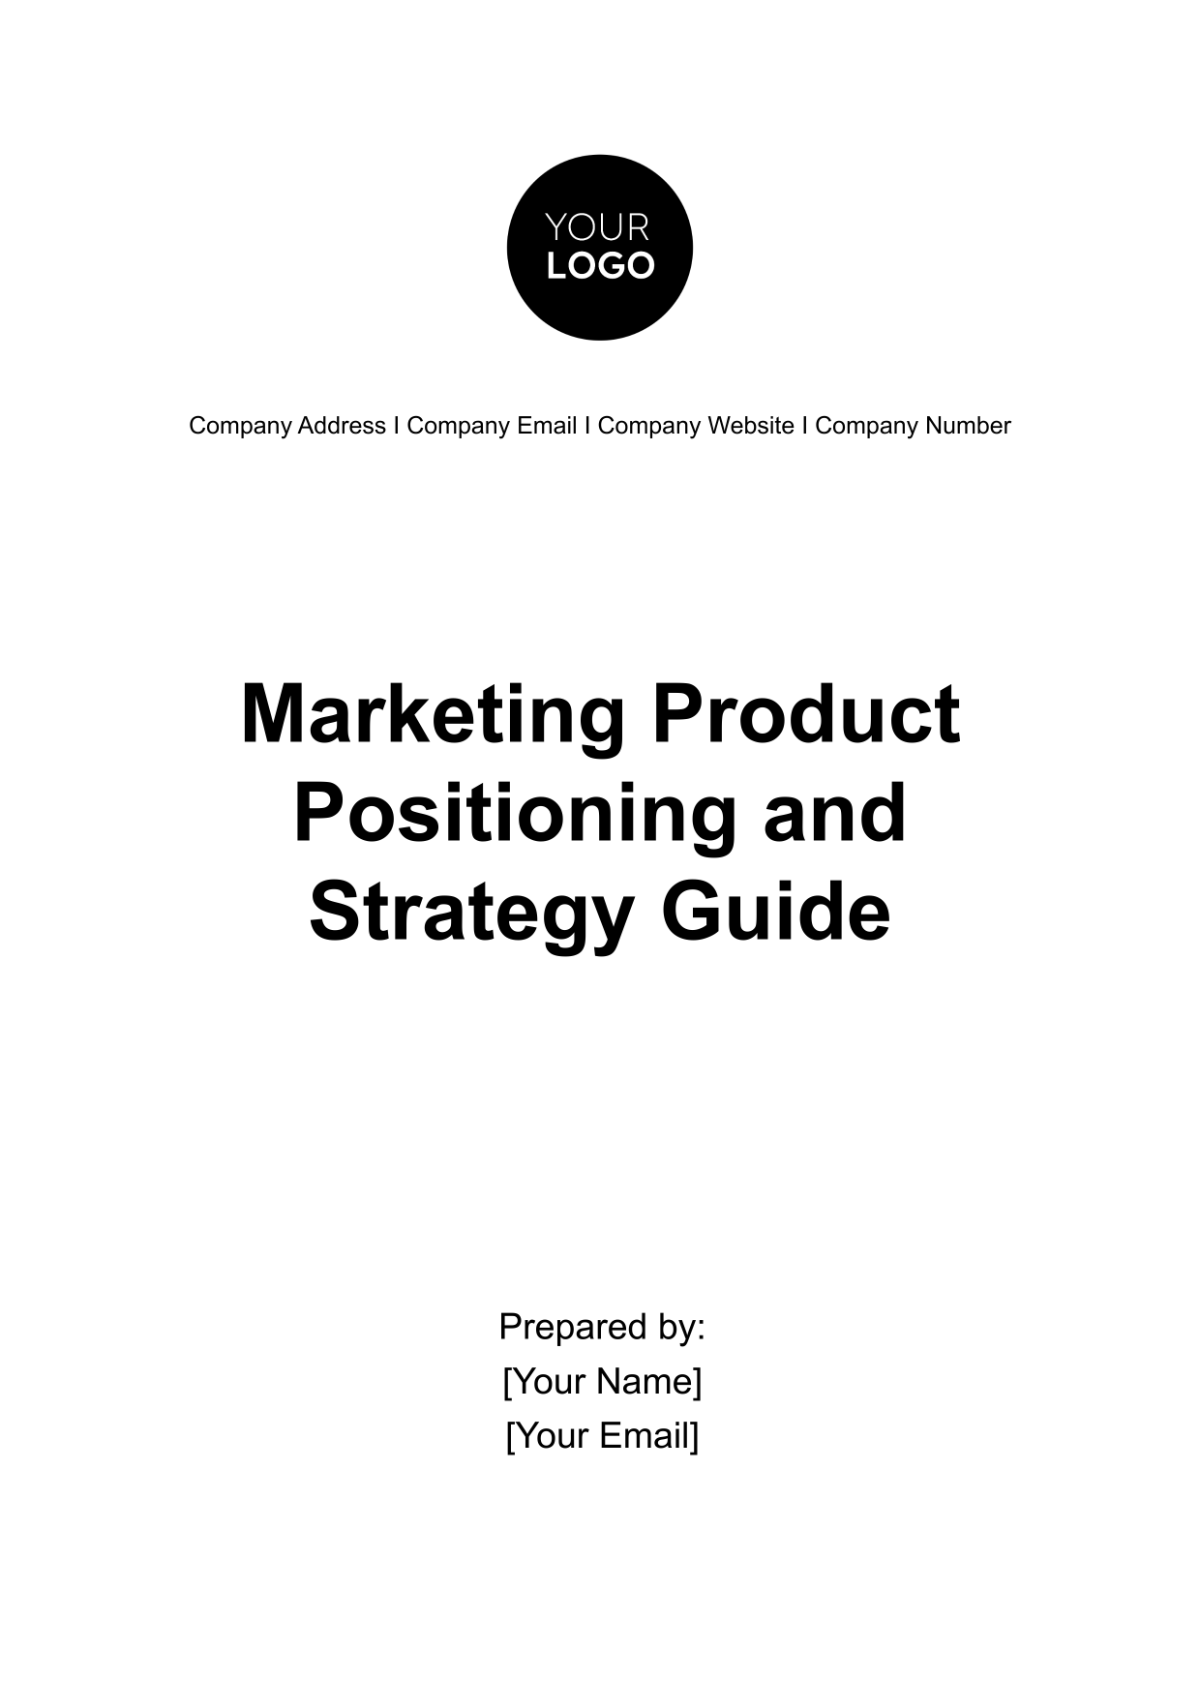 Free Marketing Product Positioning and Strategy Guide Template